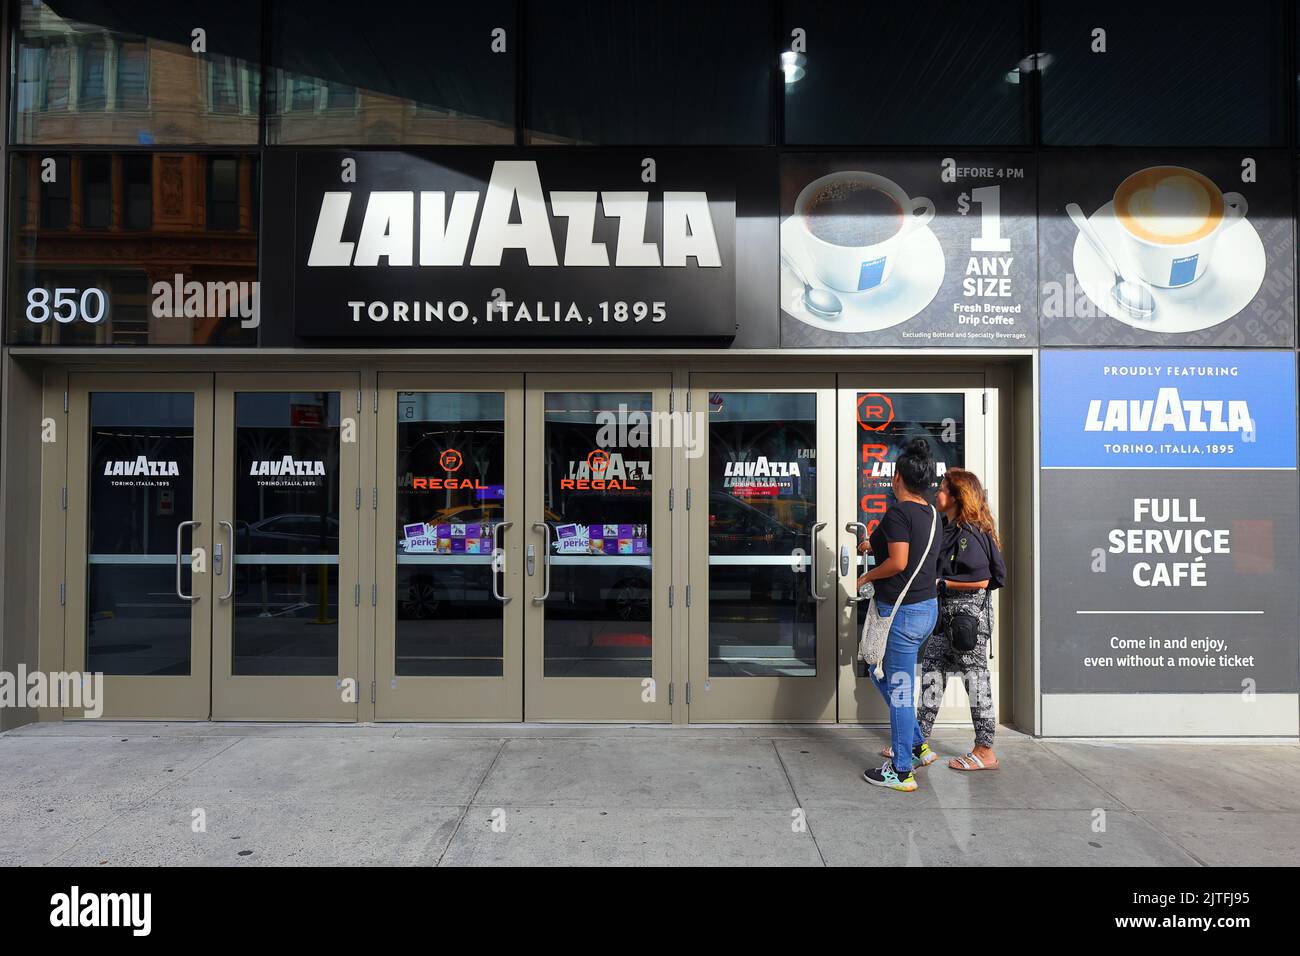 Lavazza, 850 Broadway, New York, NYC storefront photo of an Italian coffee shop chain located inside a movie theater in Manhattan Union Square. Stock Photo